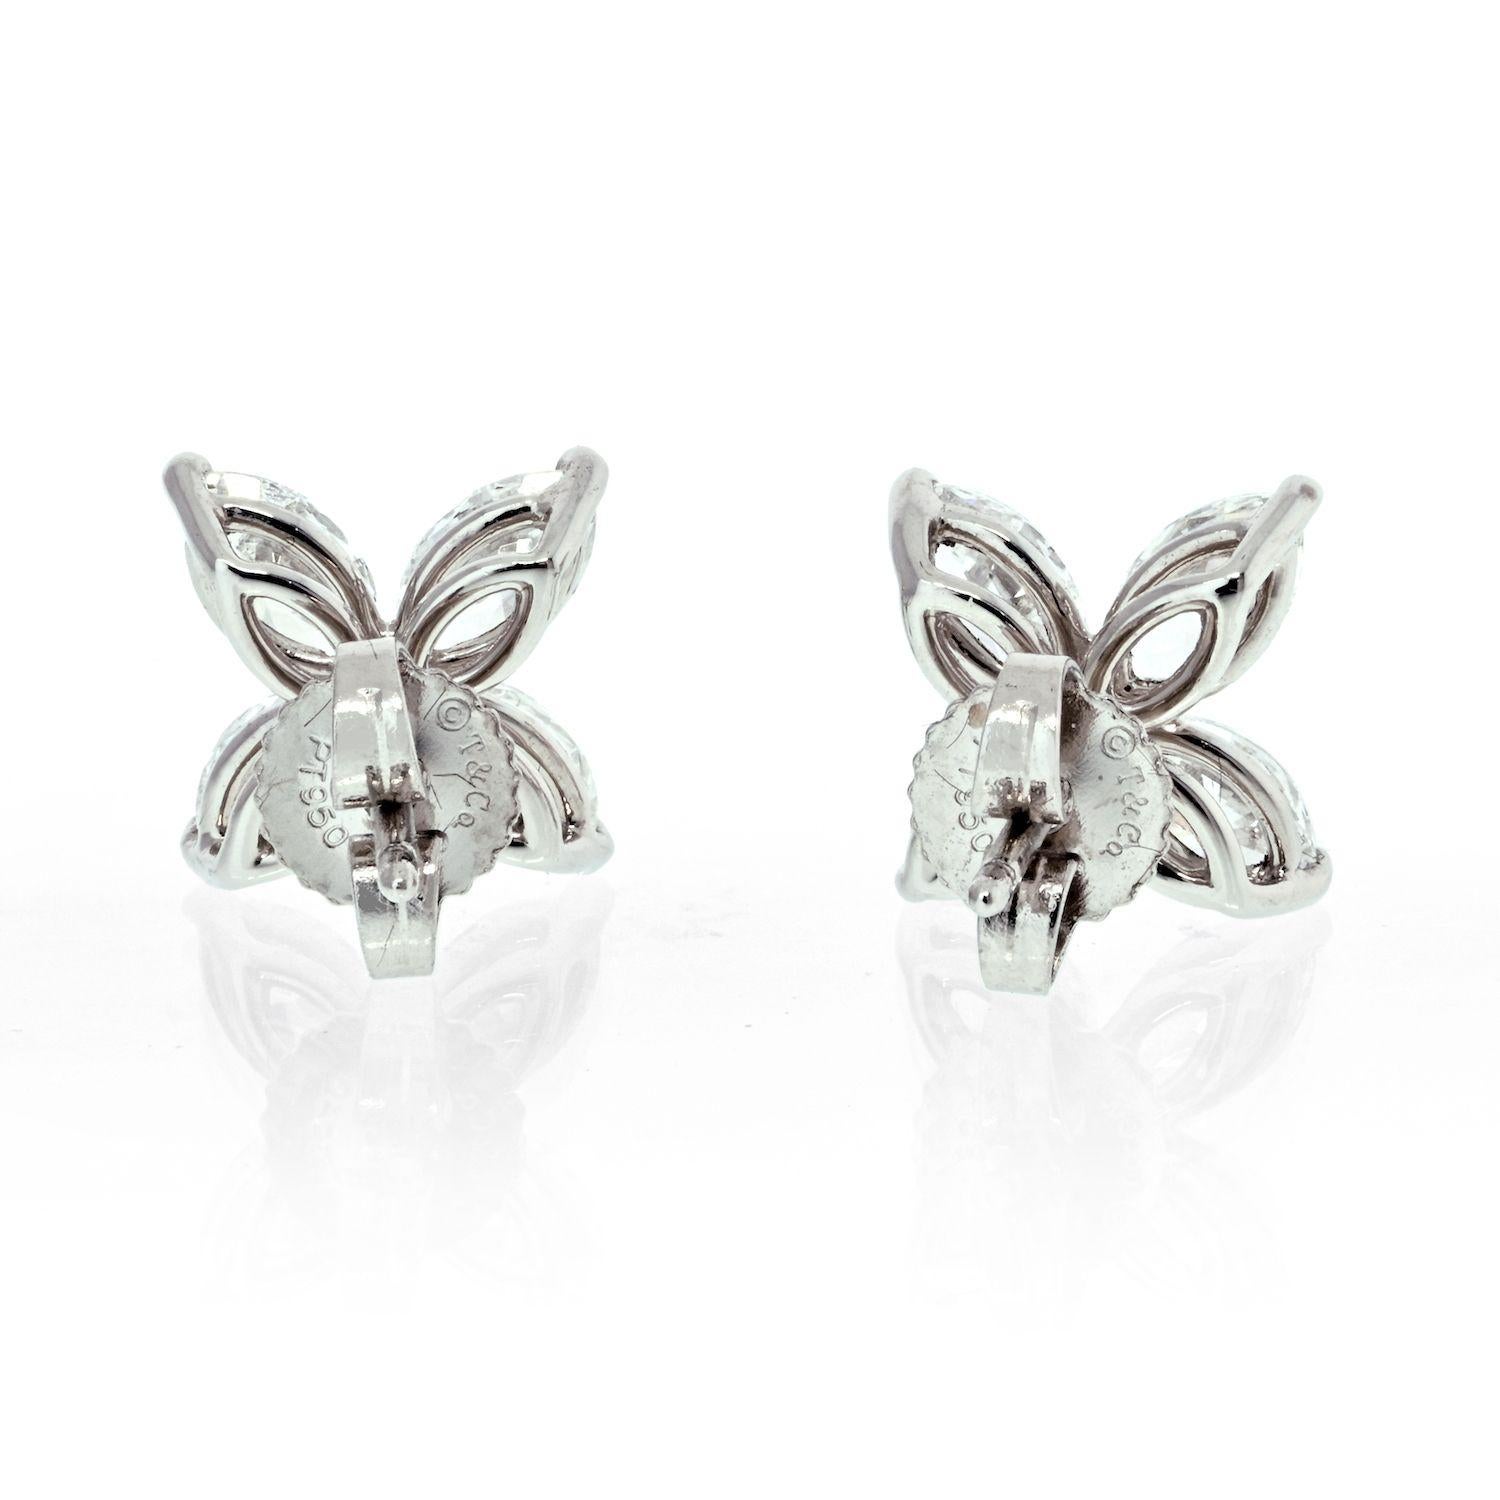 Marquise Cut Tiffany & Co. Platinum 1.62cts Victoria Large Model Stud Earrings